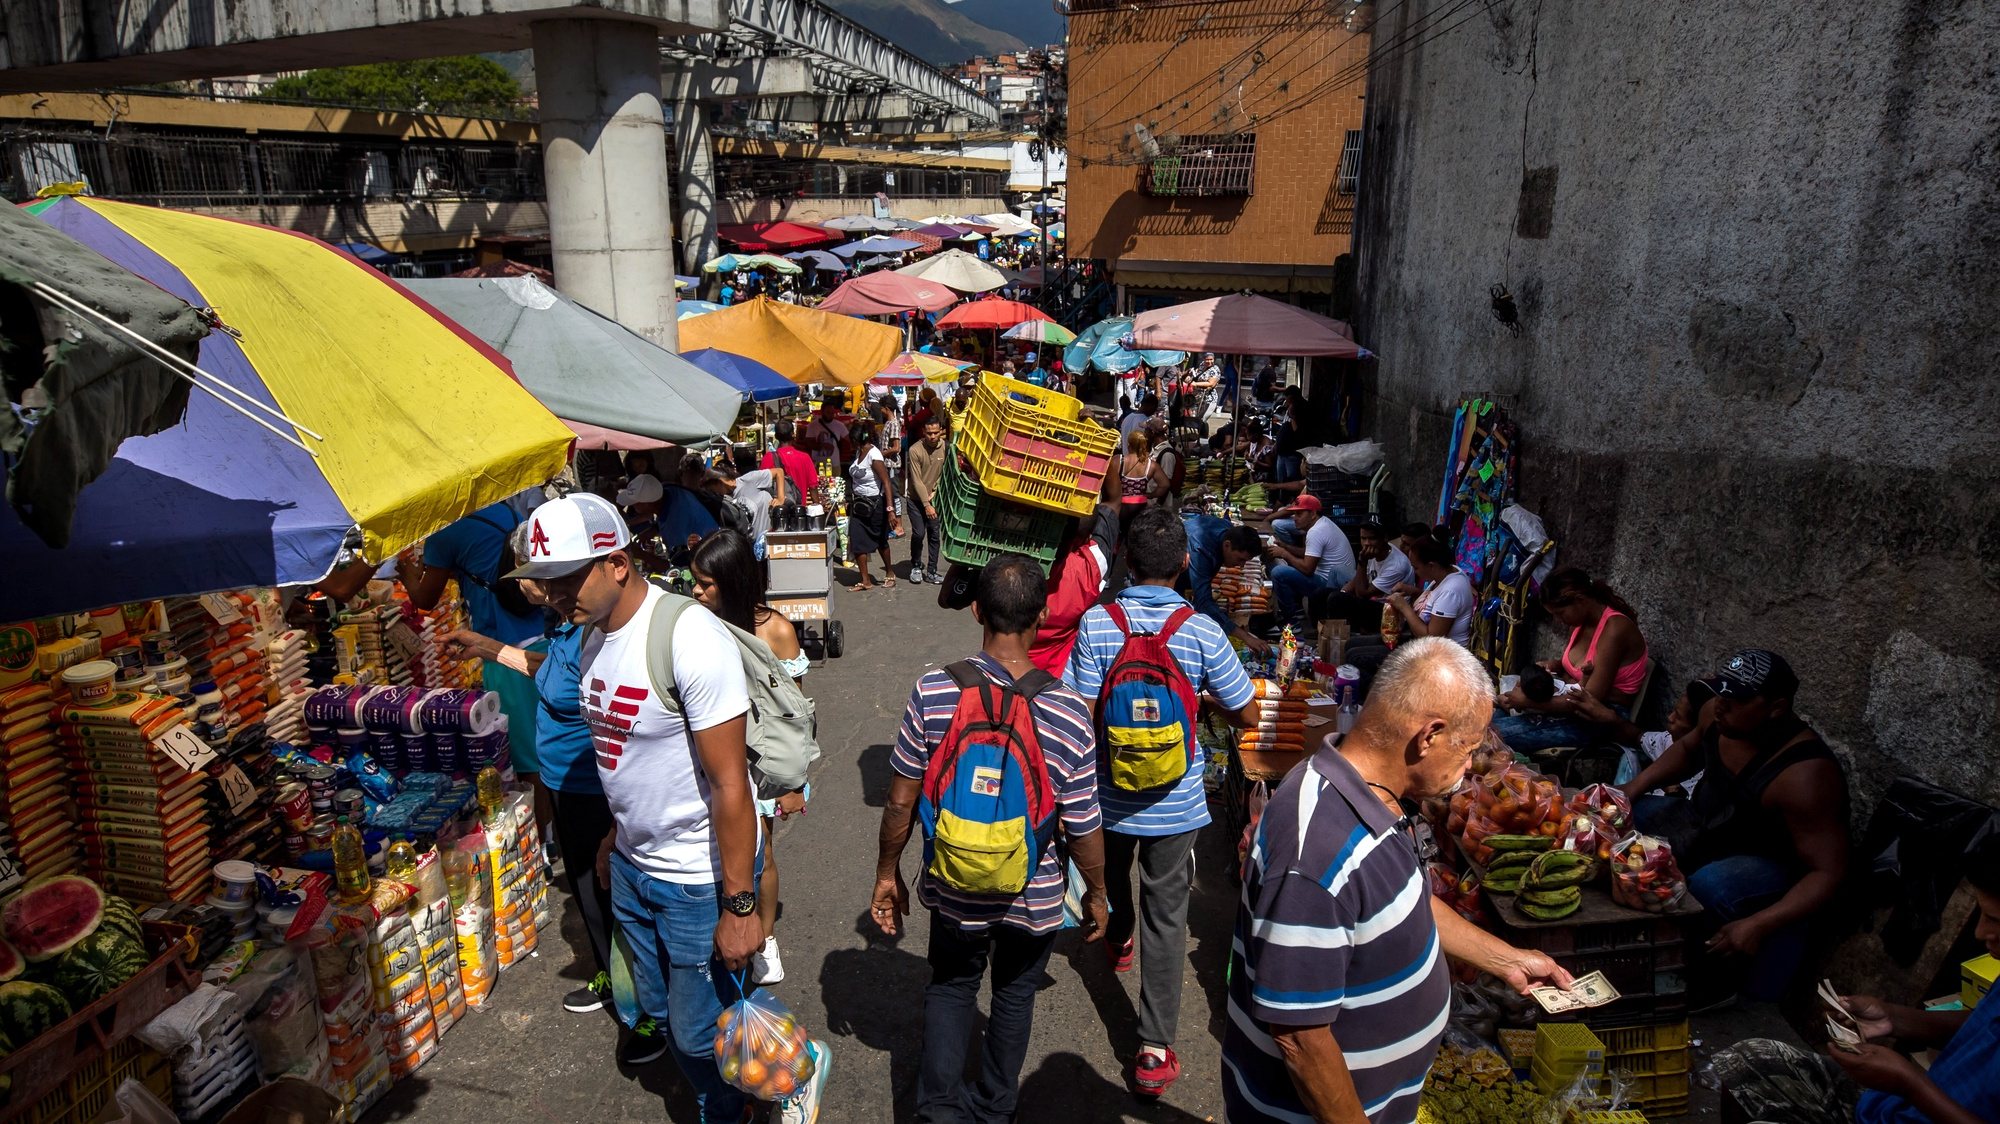 epa10415987 People shop at a market in Caracas, Venezuela, 14 January 2023 (issued 19 January 2023). The increases in the inflation rates that Venezuela has registered in the last five months, until closing 2002 at 305.7 percent interannual, according to independent estimates, arouse fears of falling back into hyperinflation, a process that went through for four years until end of 2021 and that impoverished millions of citizens.  EPA/MIGUEL GUTIERREZ